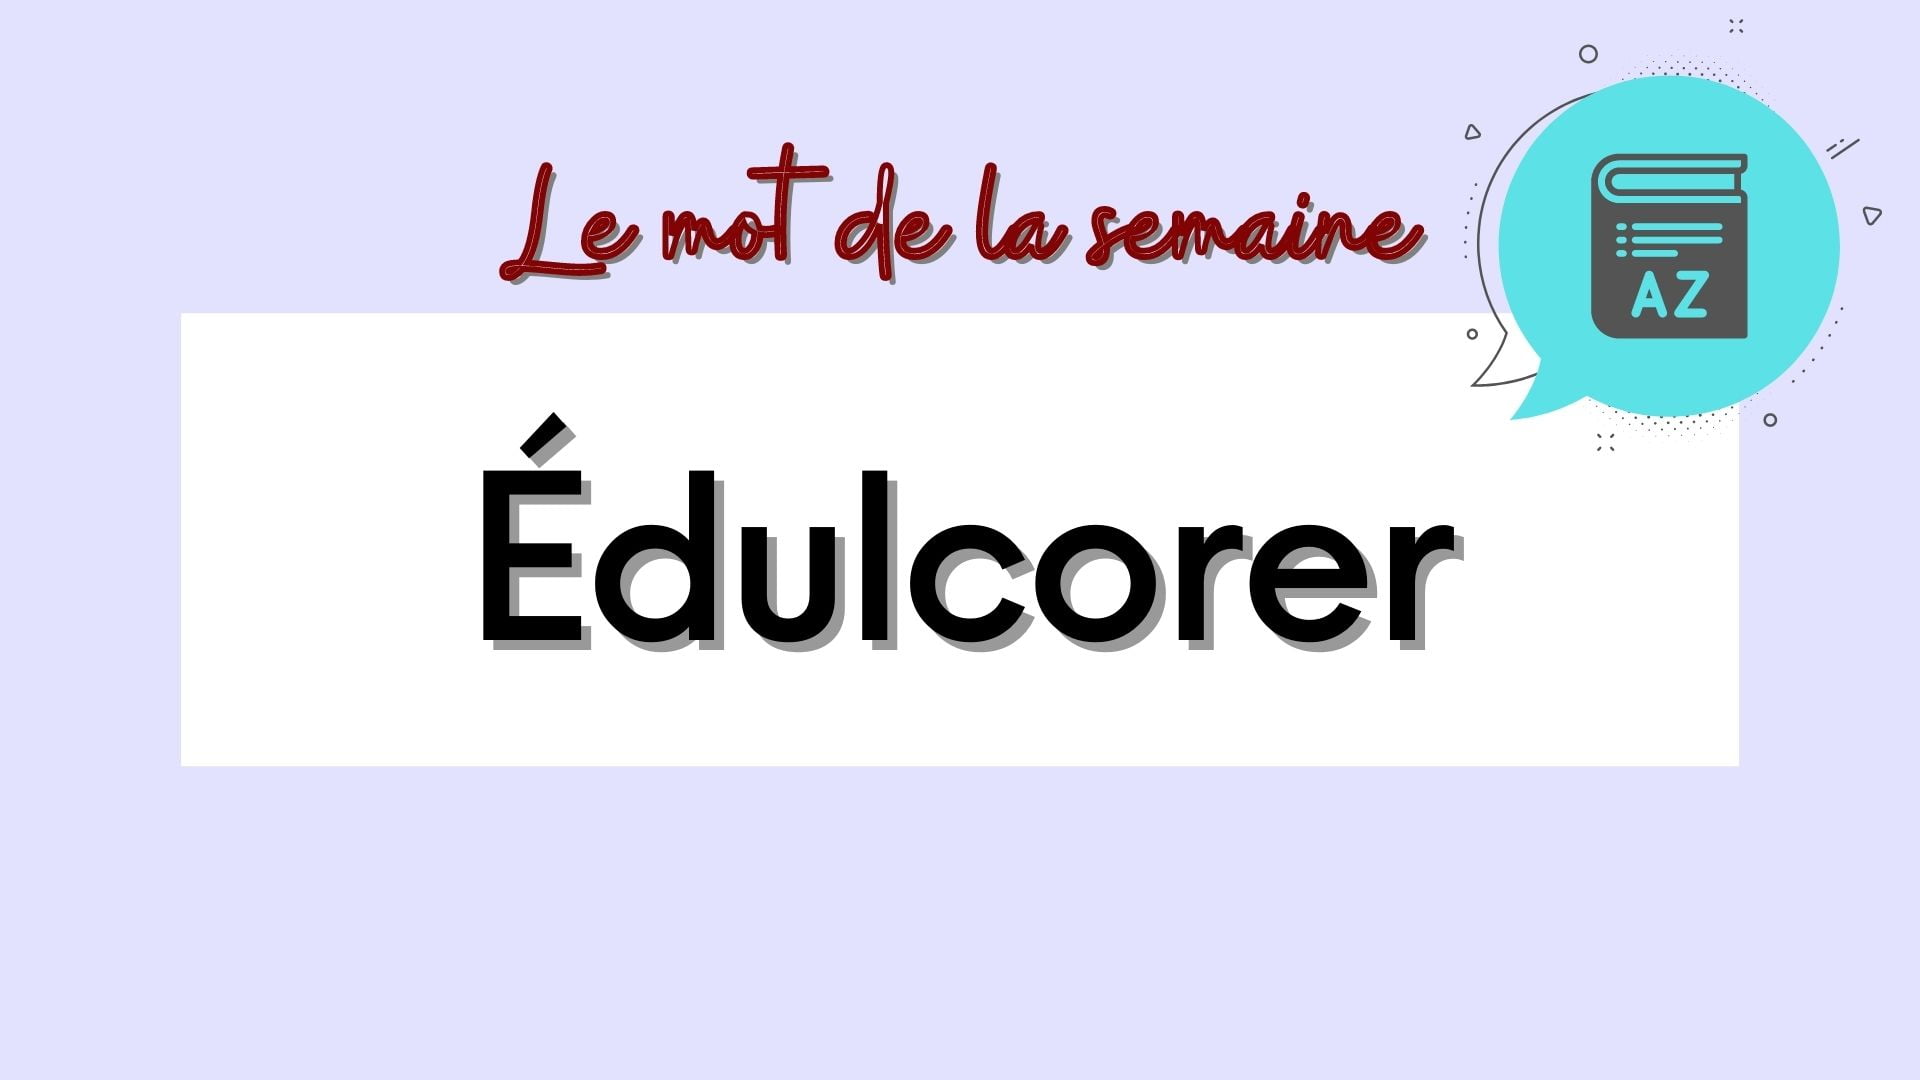 édulcorer in french - french word of the week